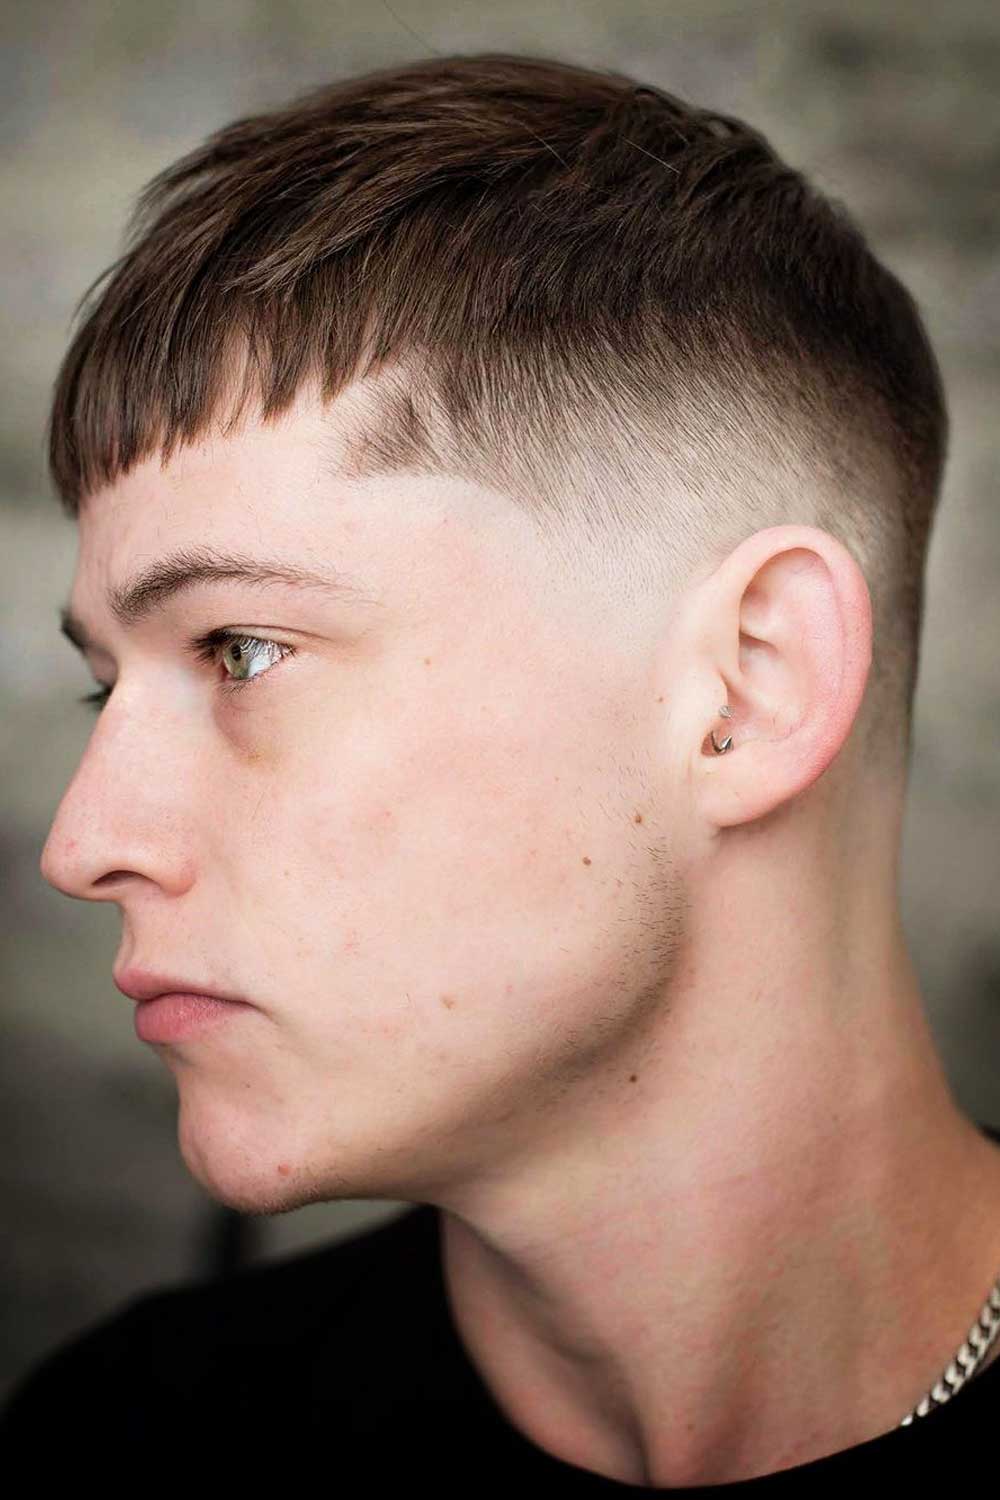 French Crop Haircuts For Men #shorthaircutsformen #shorthaircuts #shorthairstyles #shorthair